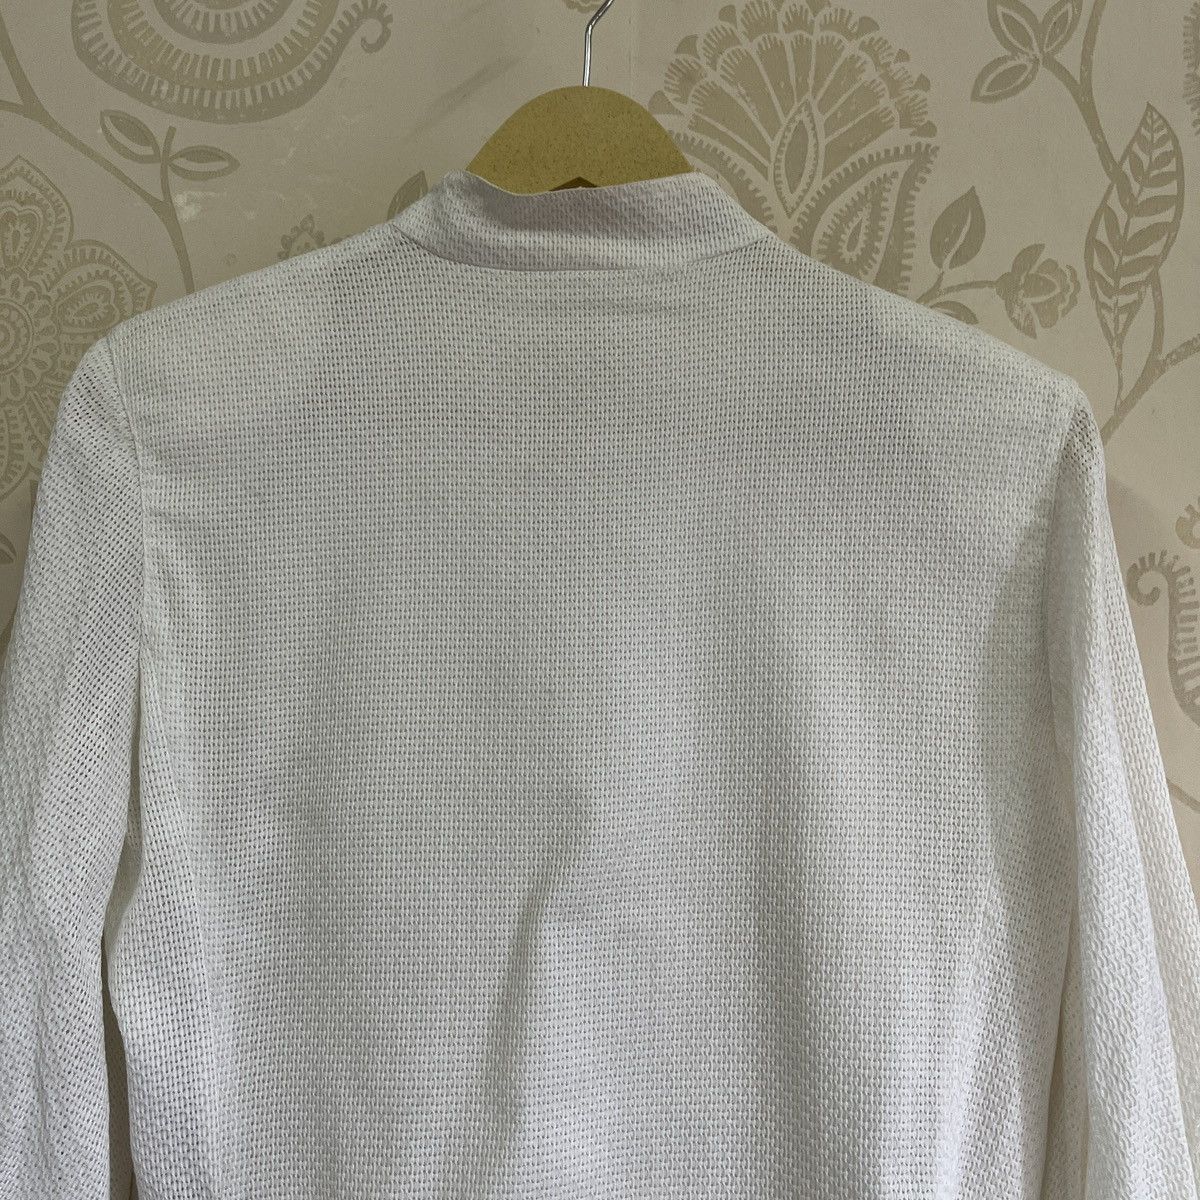 Gently Used Vintage Christian Dior Blouse Size M - 24